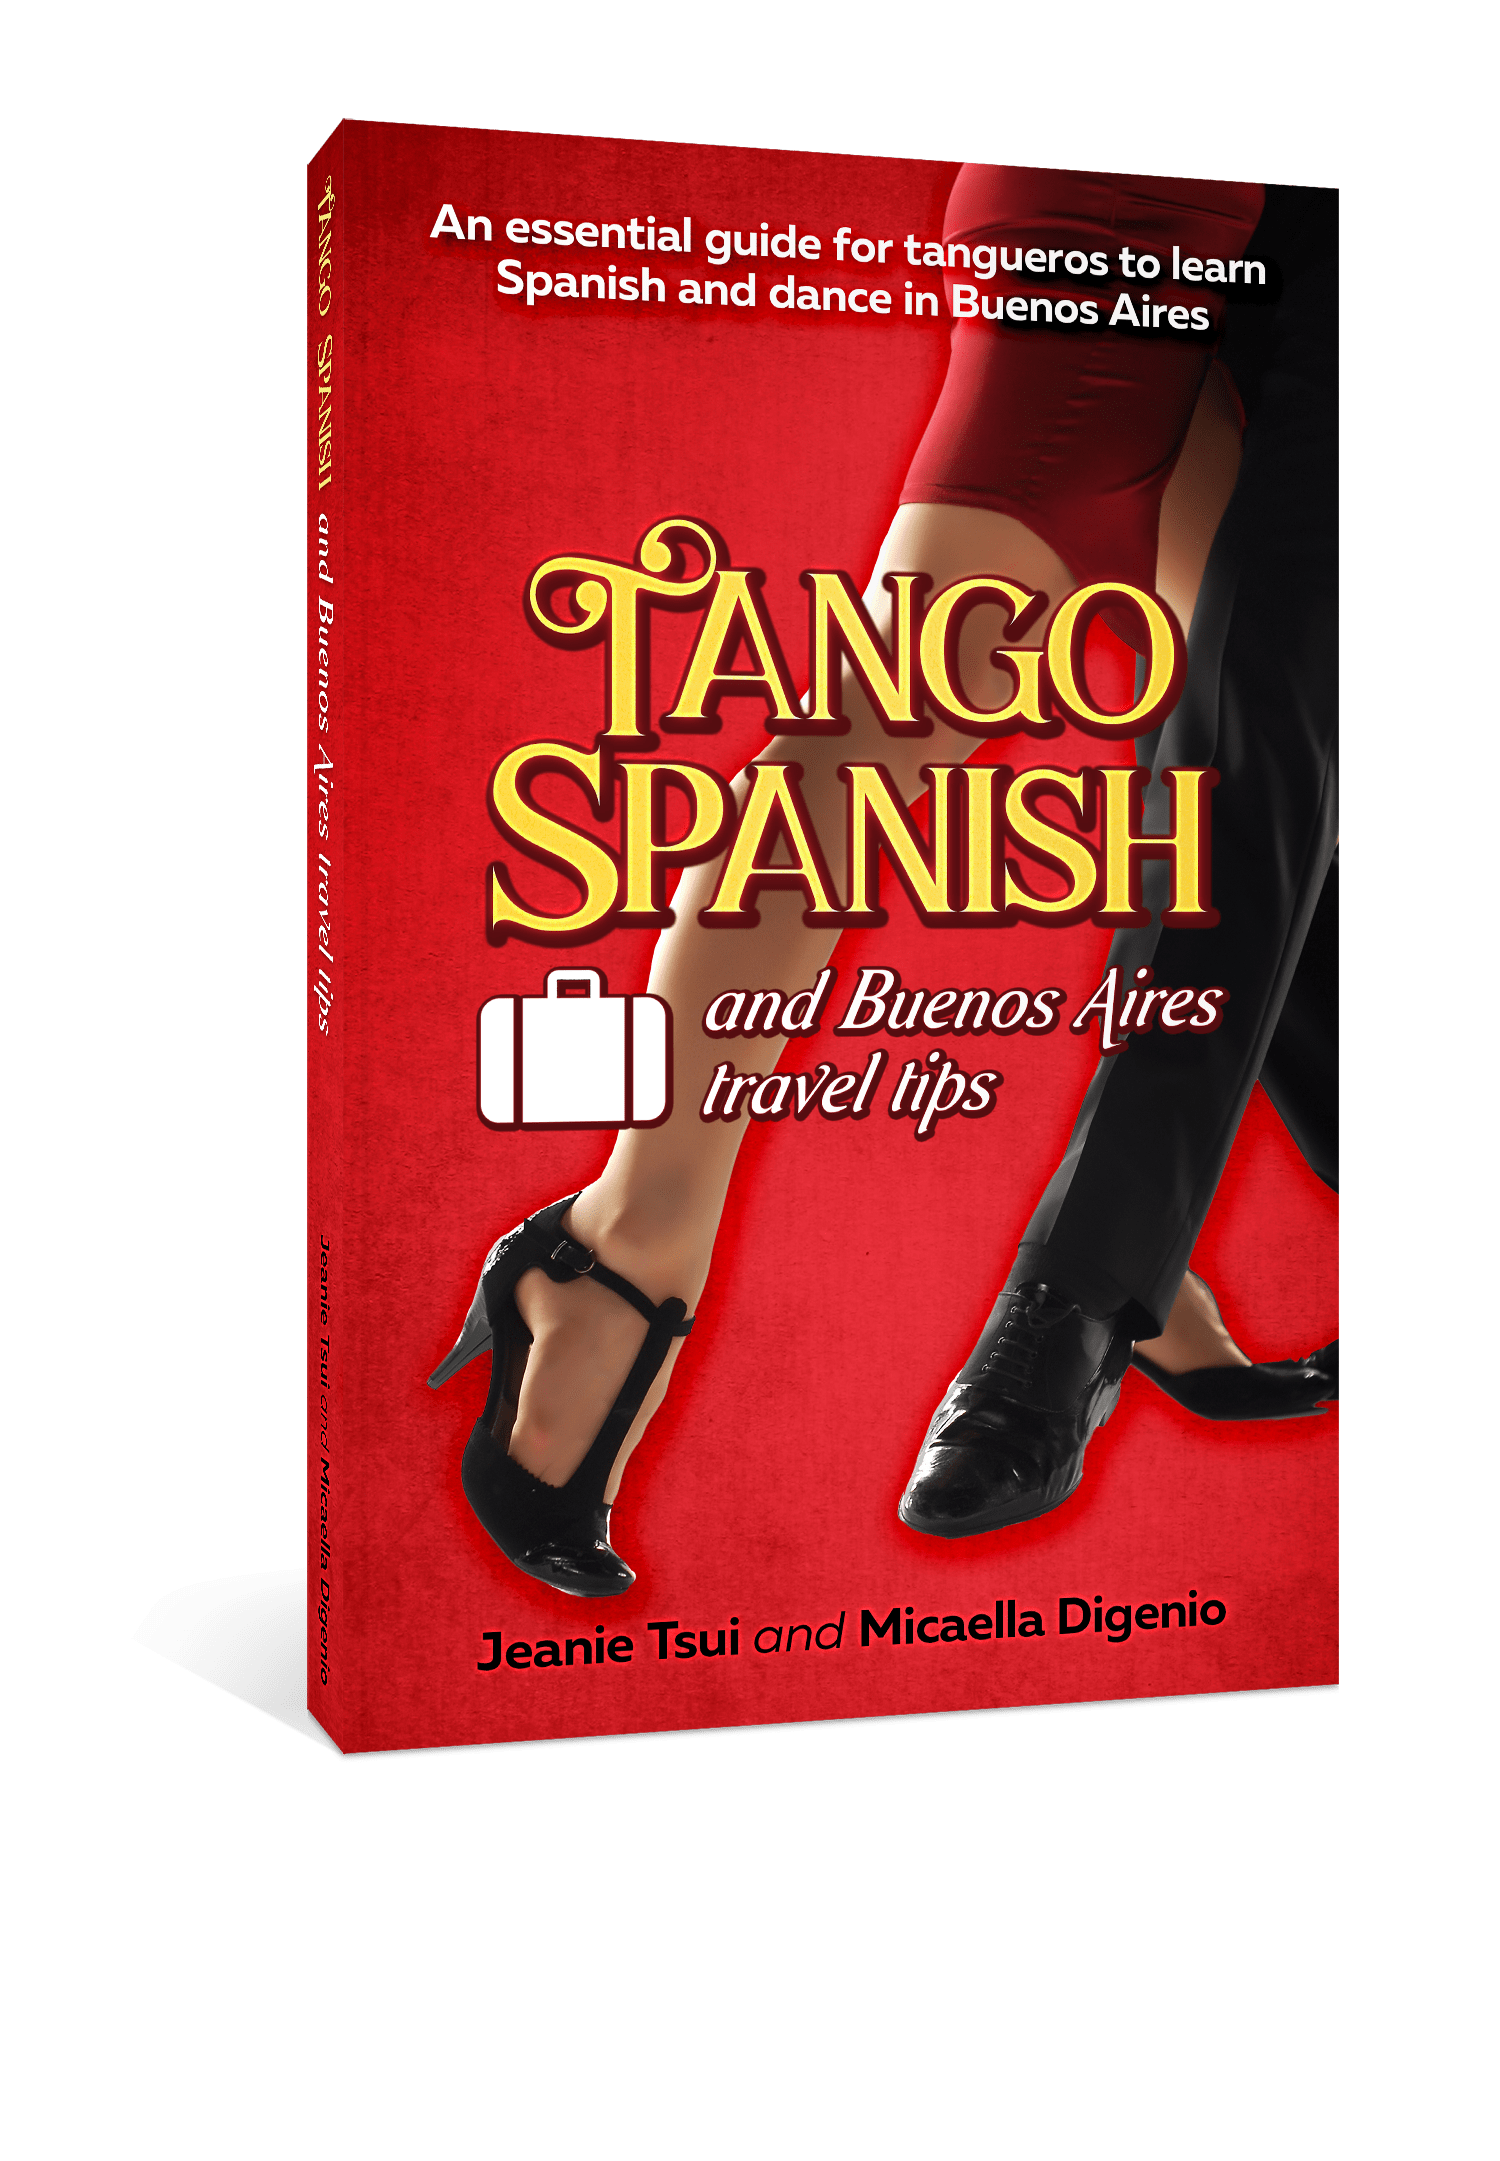 Tango Spanish and Buenos Aires Travel Tips